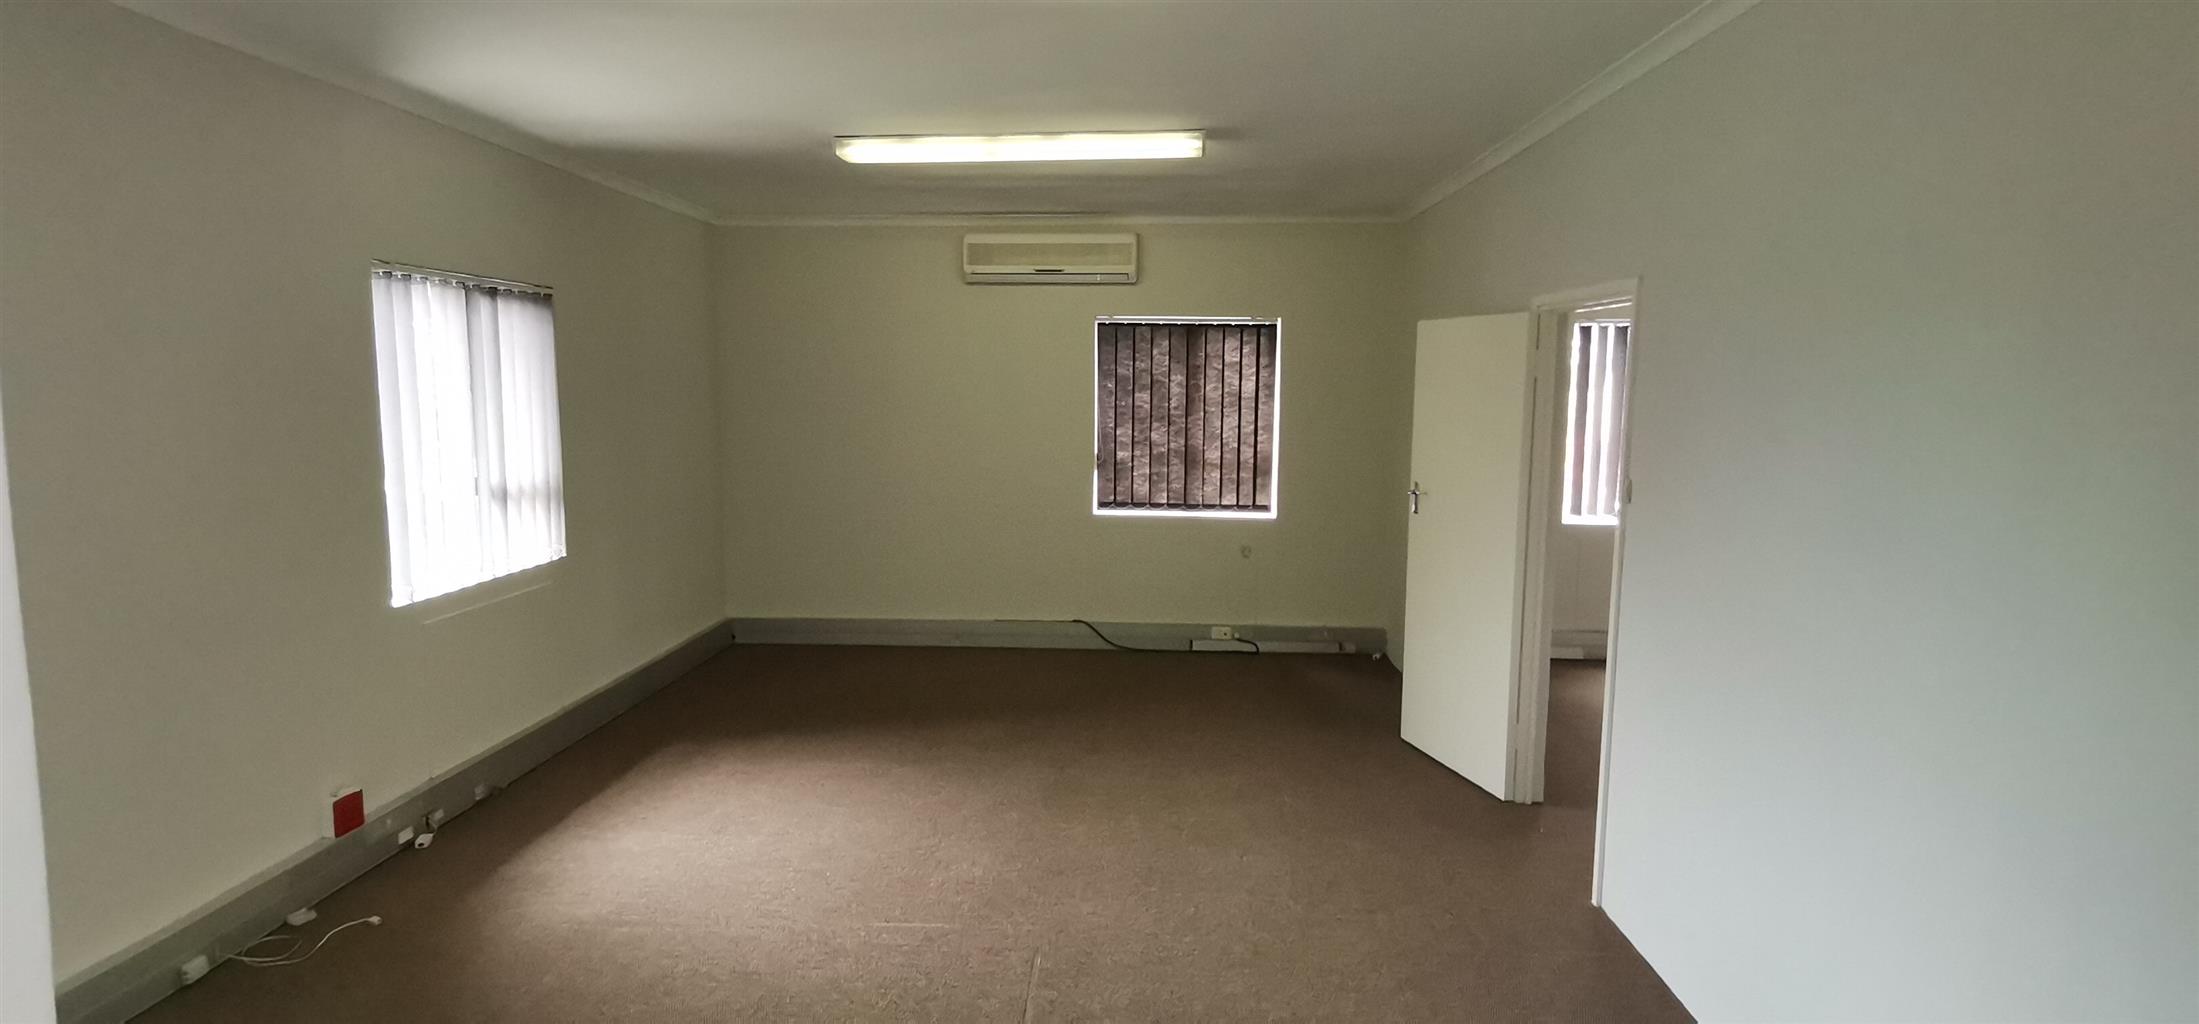 TO LET – LOVELY 77m2 OFFICE SUITE IN CENTRAL KLOOF